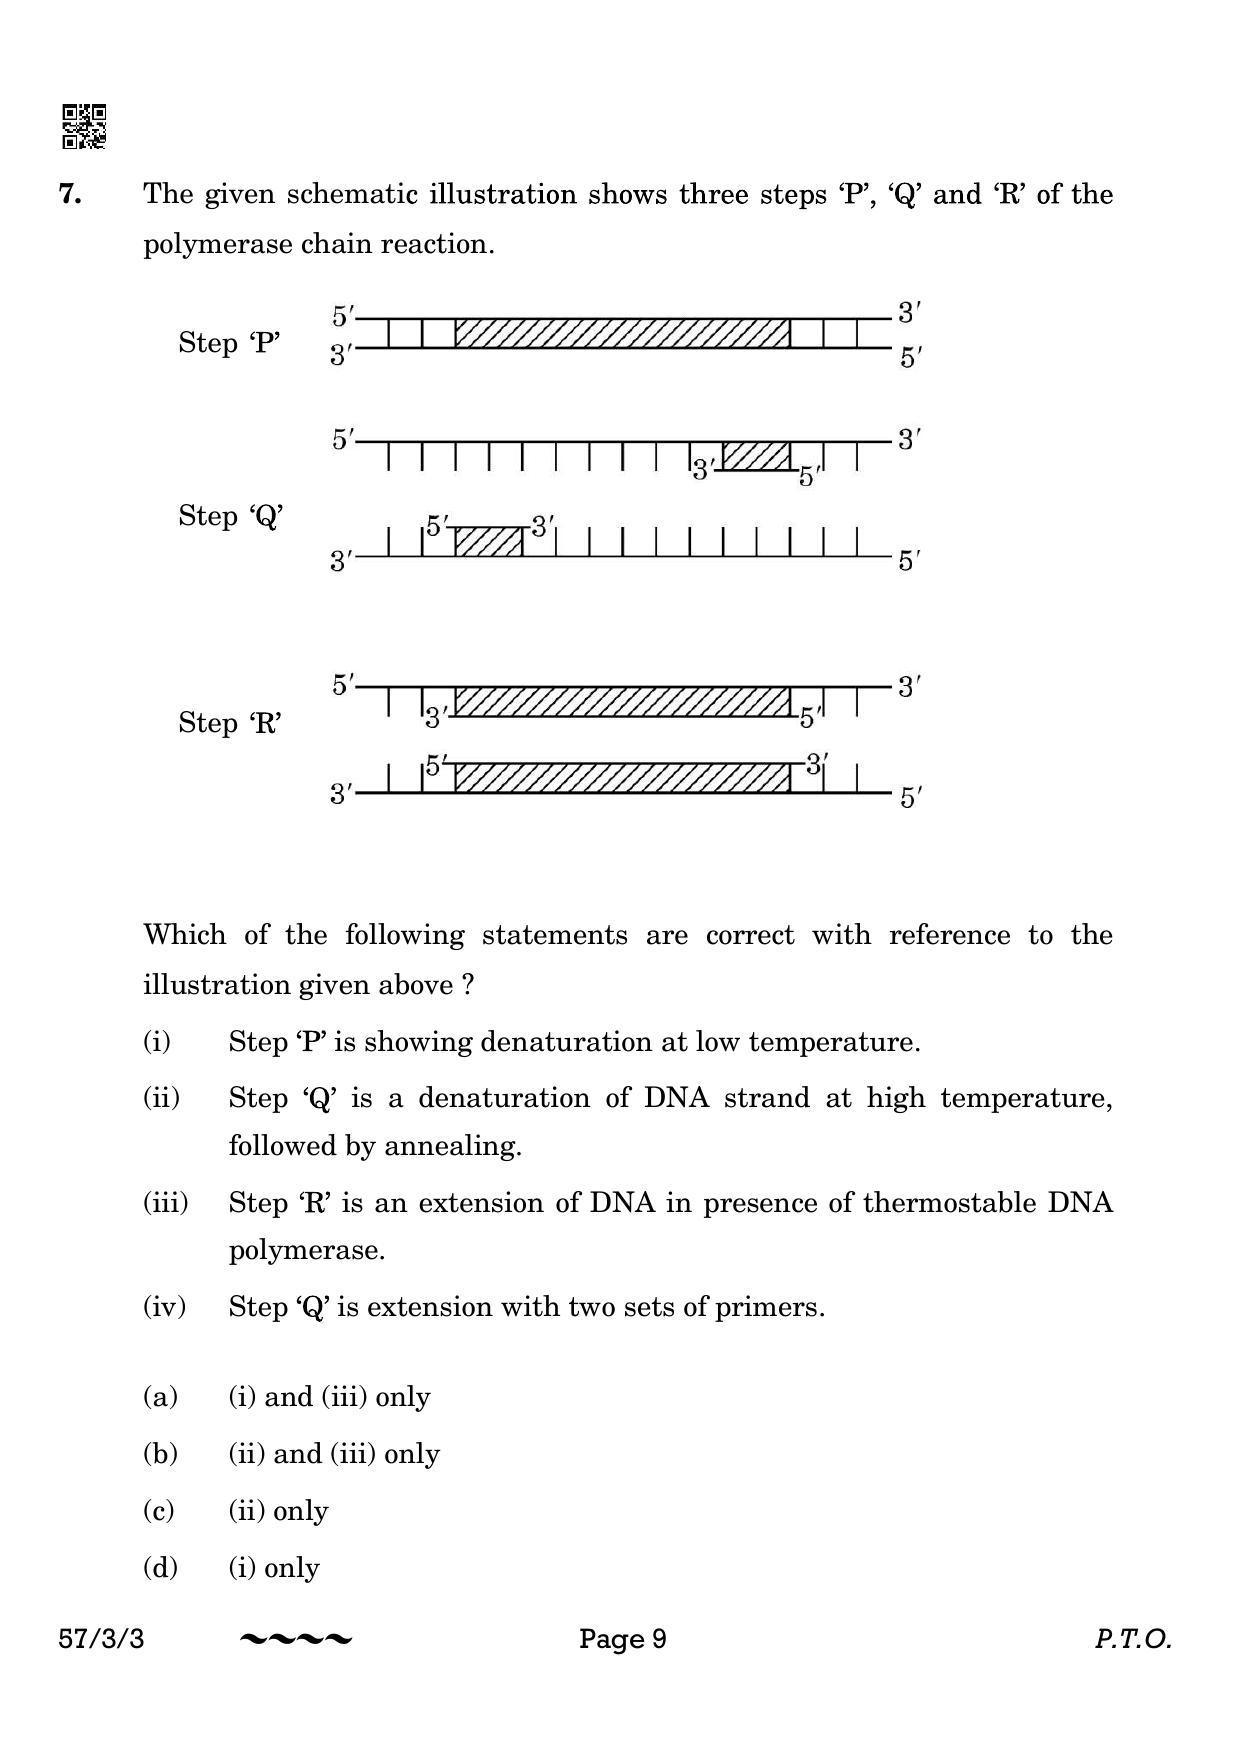 CBSE Class 12 57-3-3 Biology 2023 Question Paper - Page 9